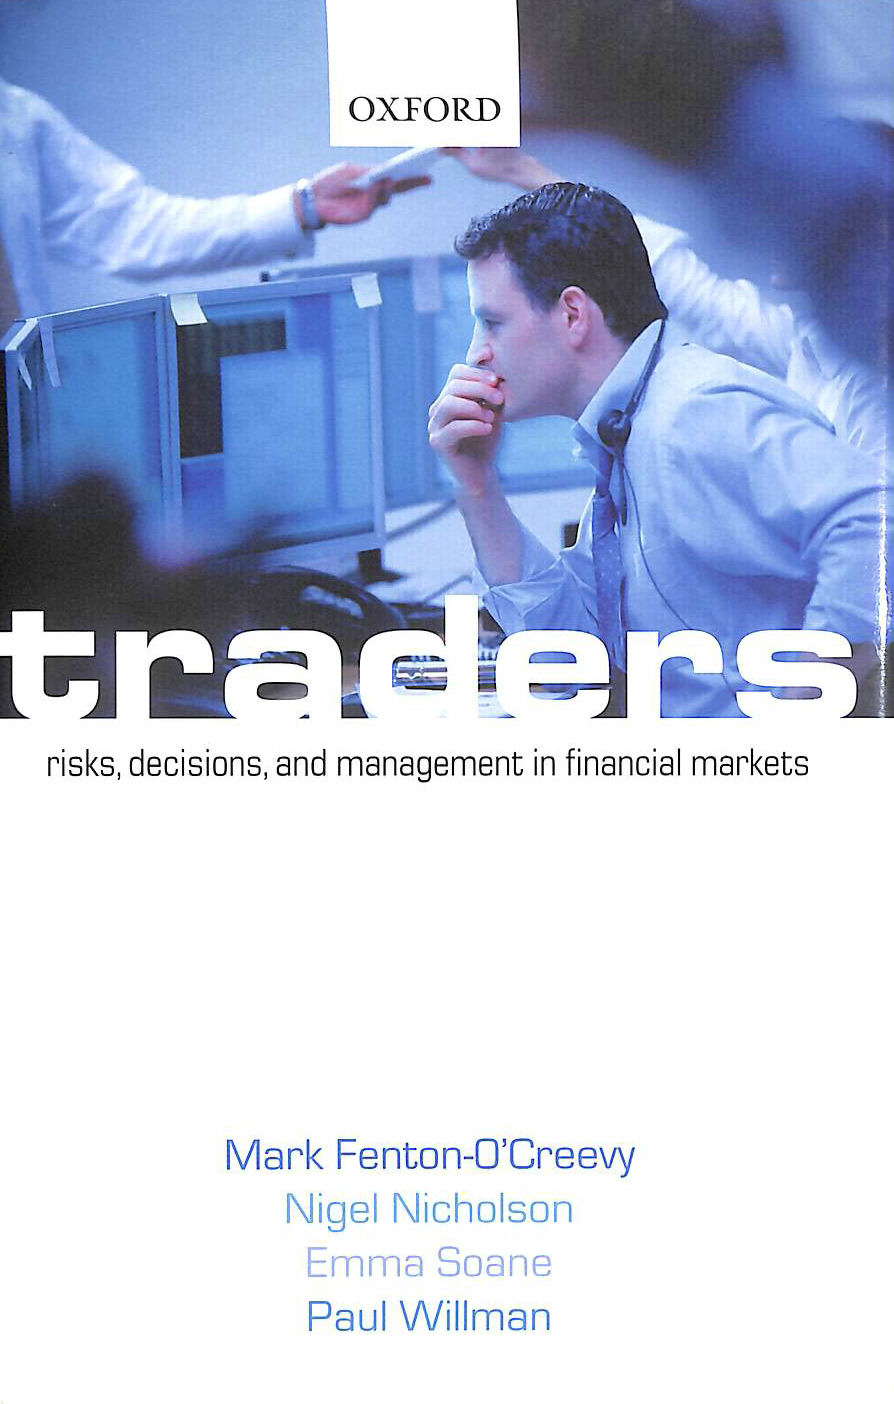 MARK FENTON-O'CREEVY (AUTHOR), NIGEL NICHOLSON (AUTHOR), EMMA SOANE (AUTHOR) - Traders: Risks, Decisions, and Management in Financial Markets